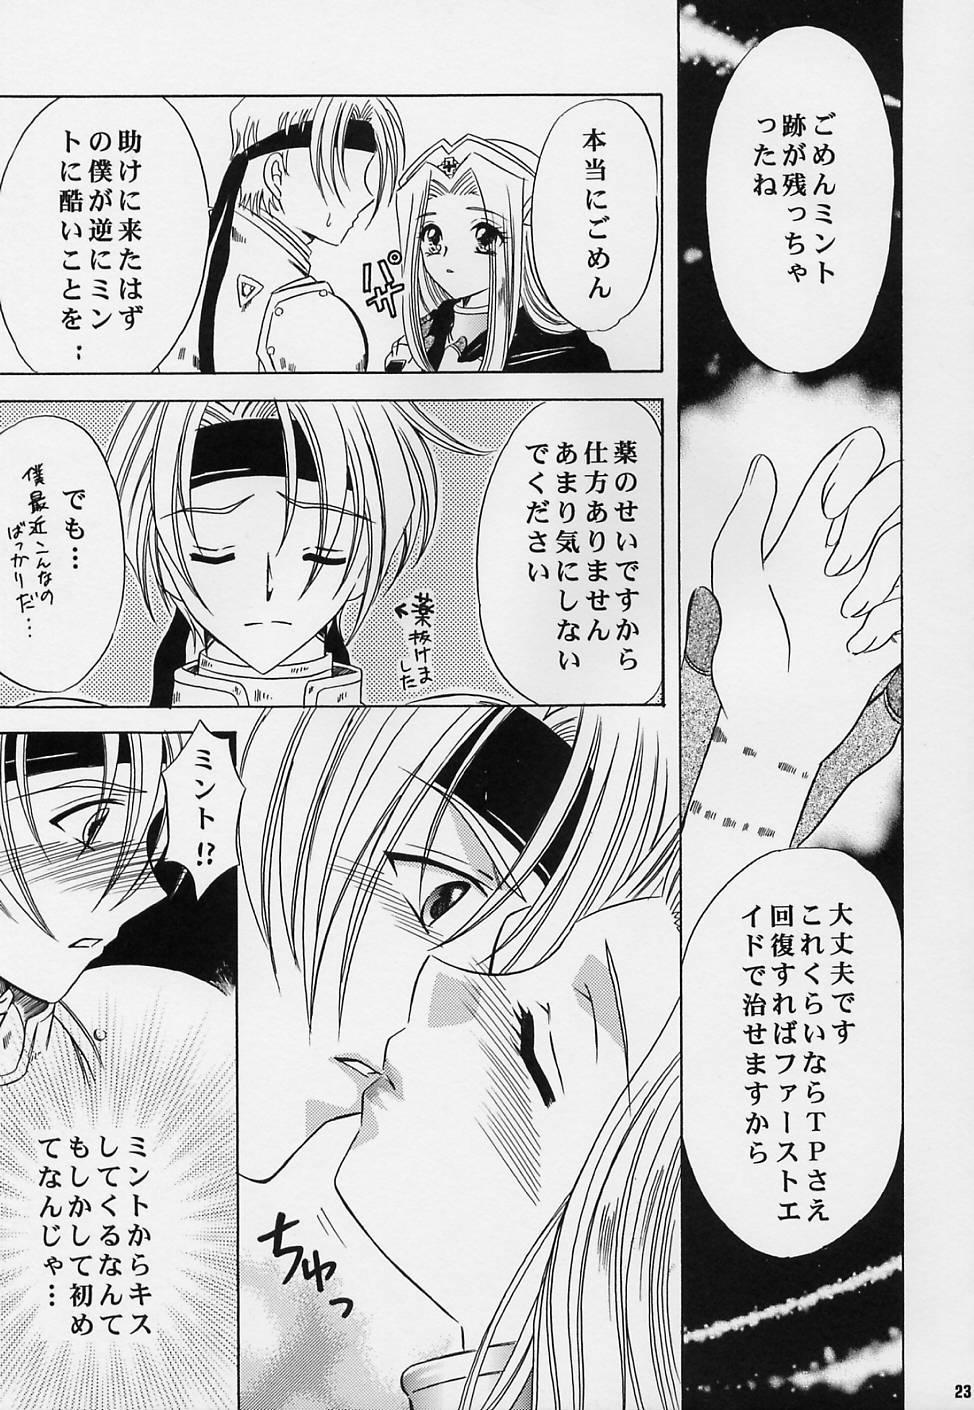 Solo Preserved Flower - Tales of phantasia 8teenxxx - Page 22